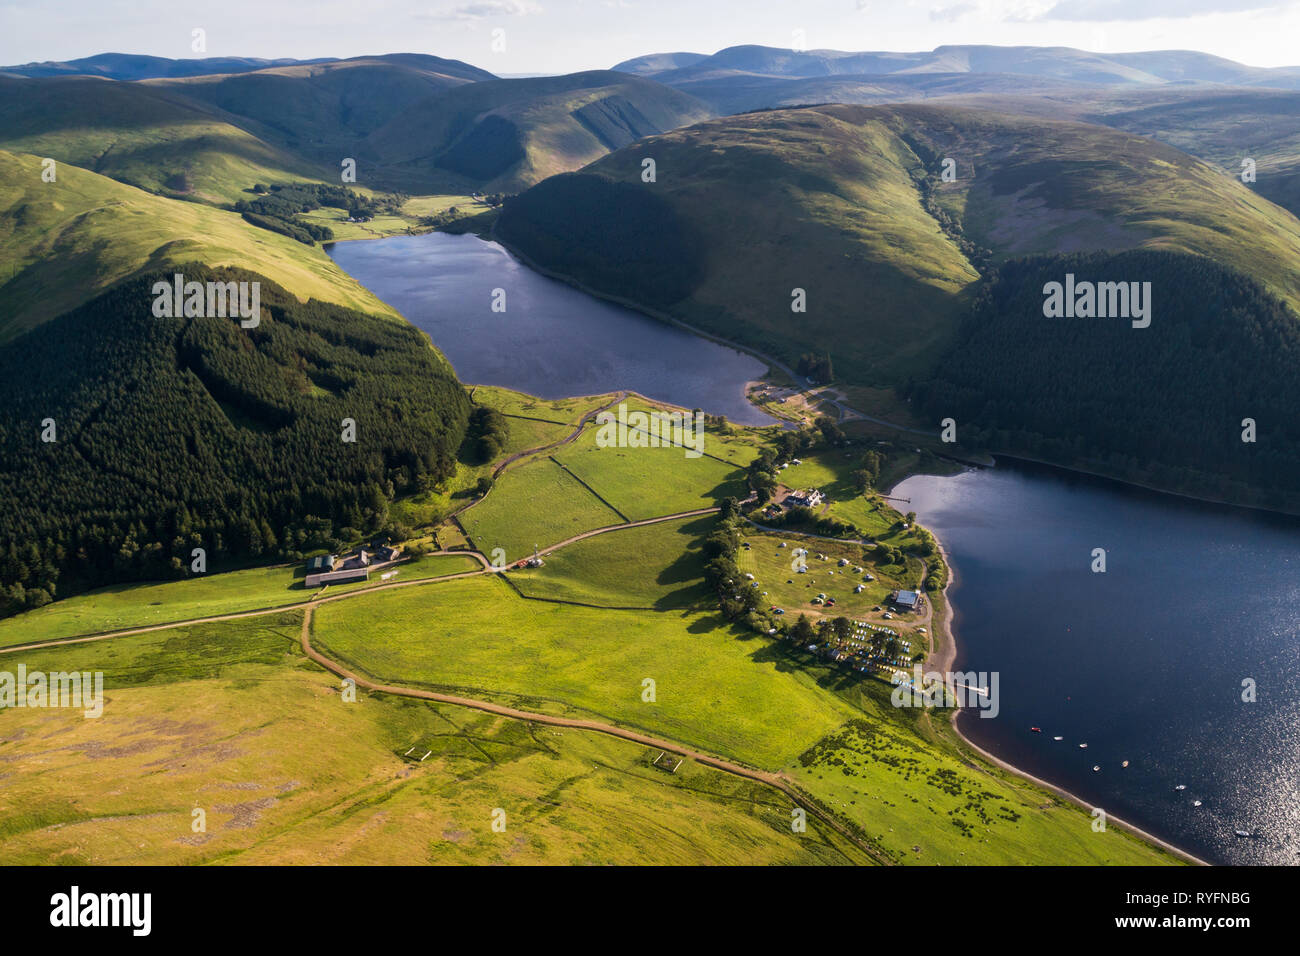 Aerial image of St Mary's Loch and Loch of the Lowes showing surrounding hills from a high vantage point. Stock Photo